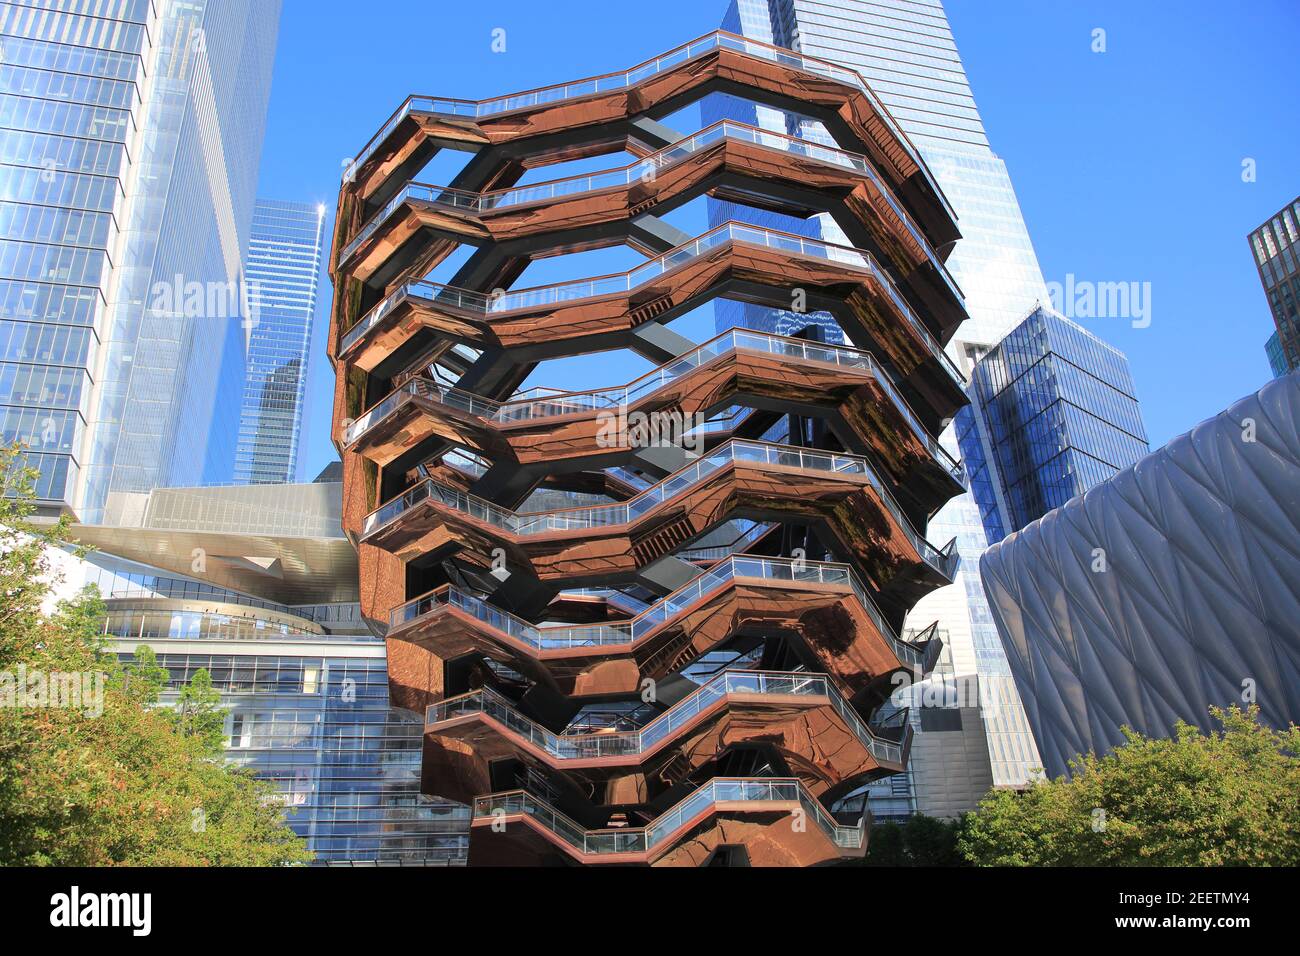 Hudson Yards, The Vessel Staircase, Public Square and Gardens, Manhattan, New York City, New York, USA Stock Photo